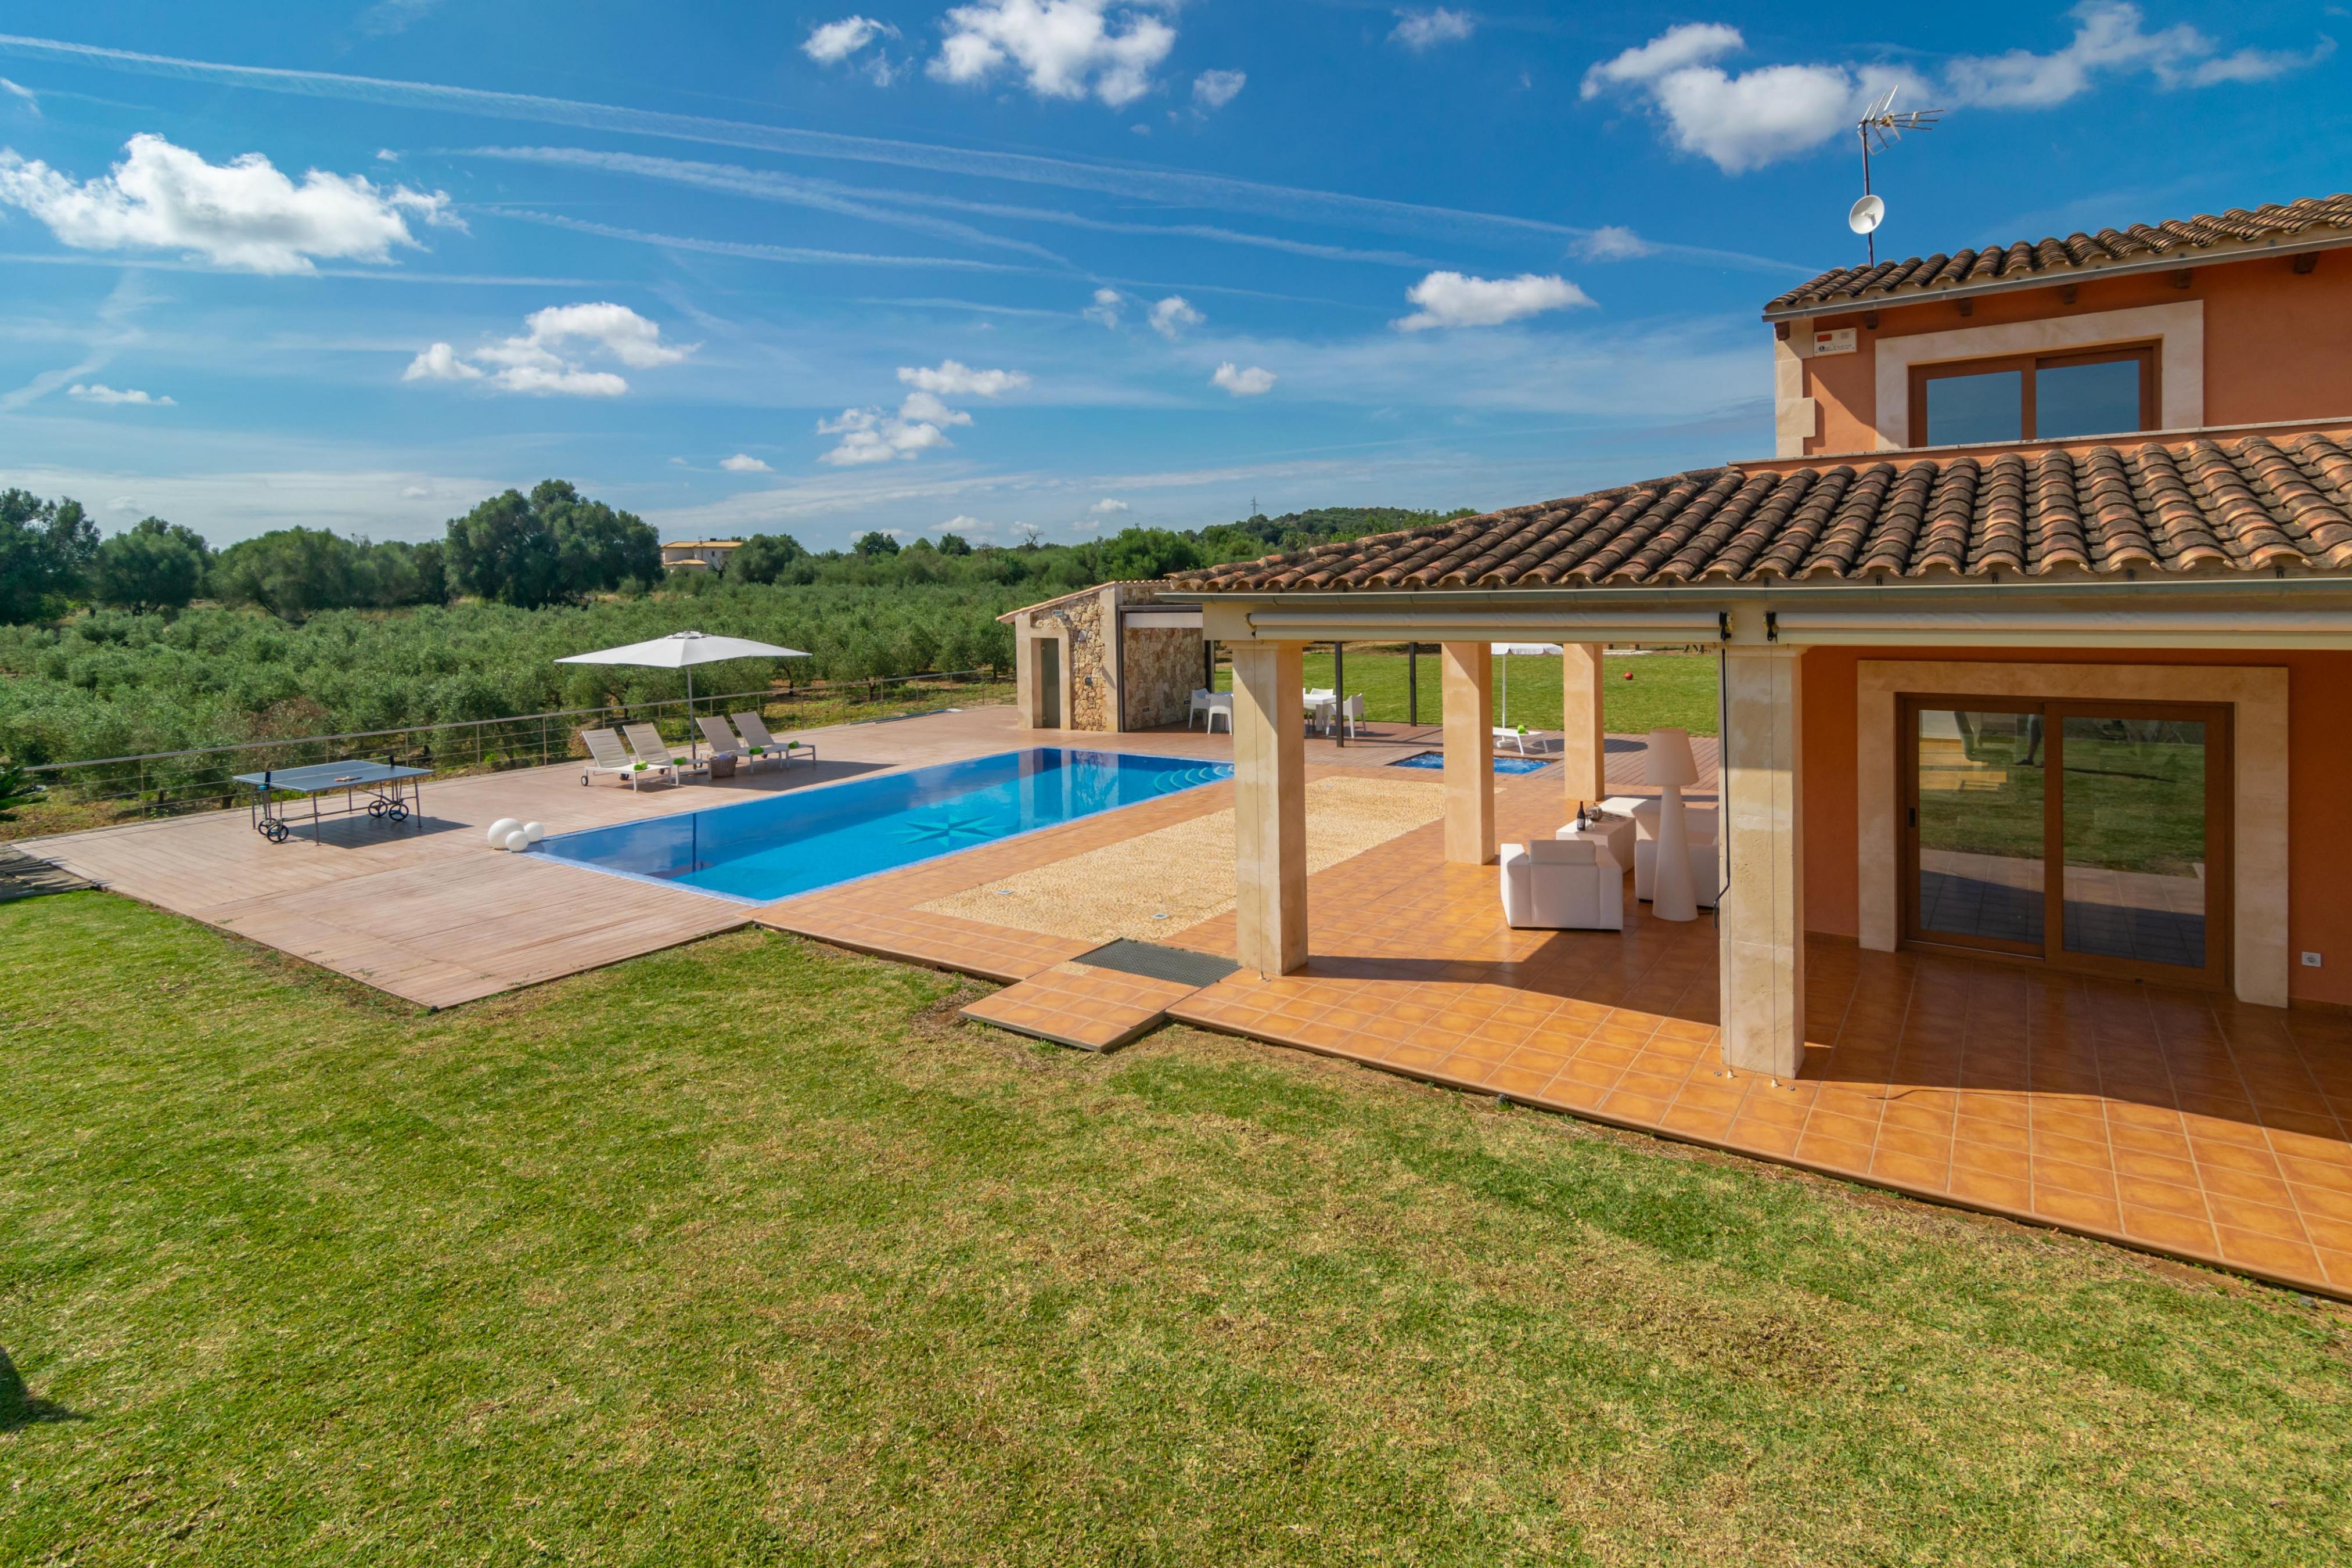 Property Image 1 - SON MOREI DE SES PENYES - Superb villa with private pool and free WiFi.